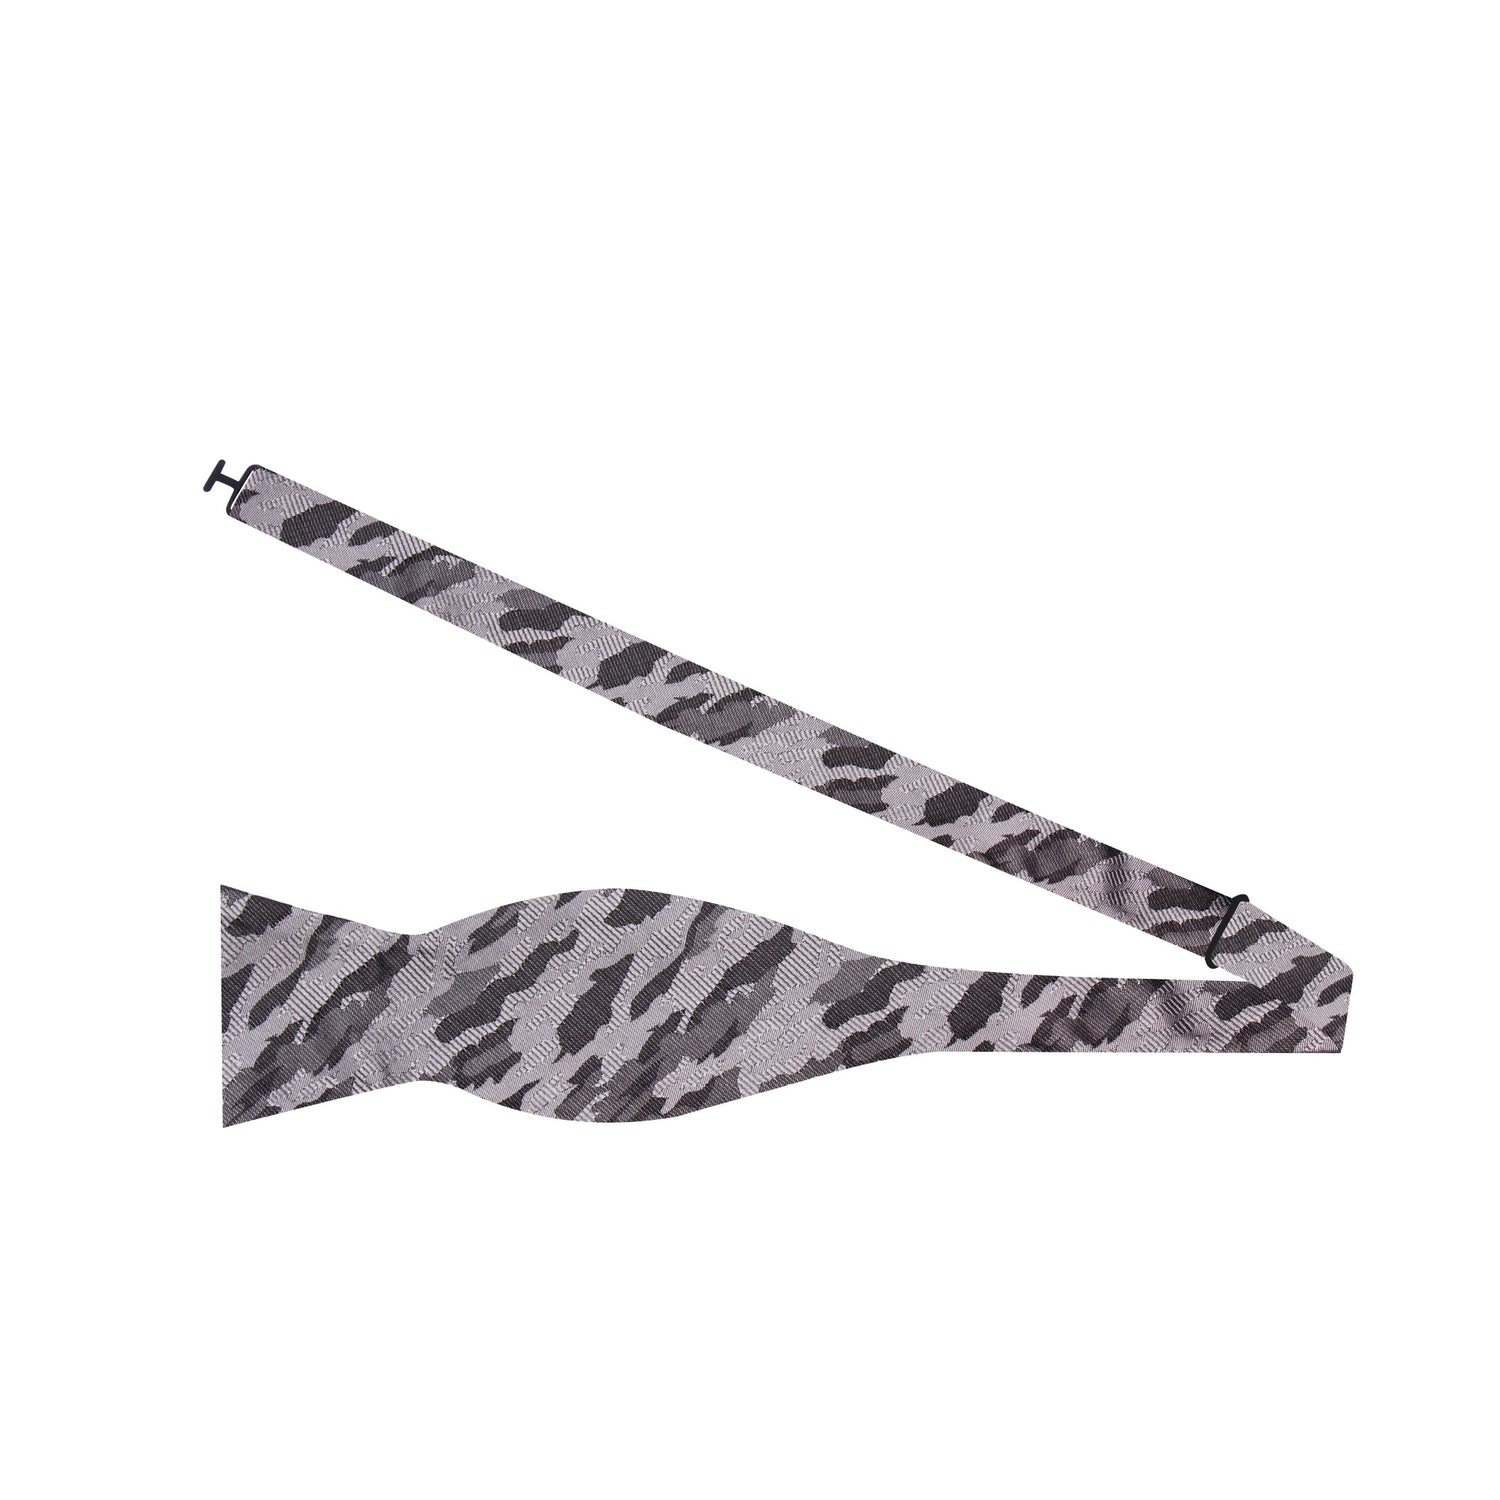 Shades of Grey and Black Camouflage Bow Tie Self Tie